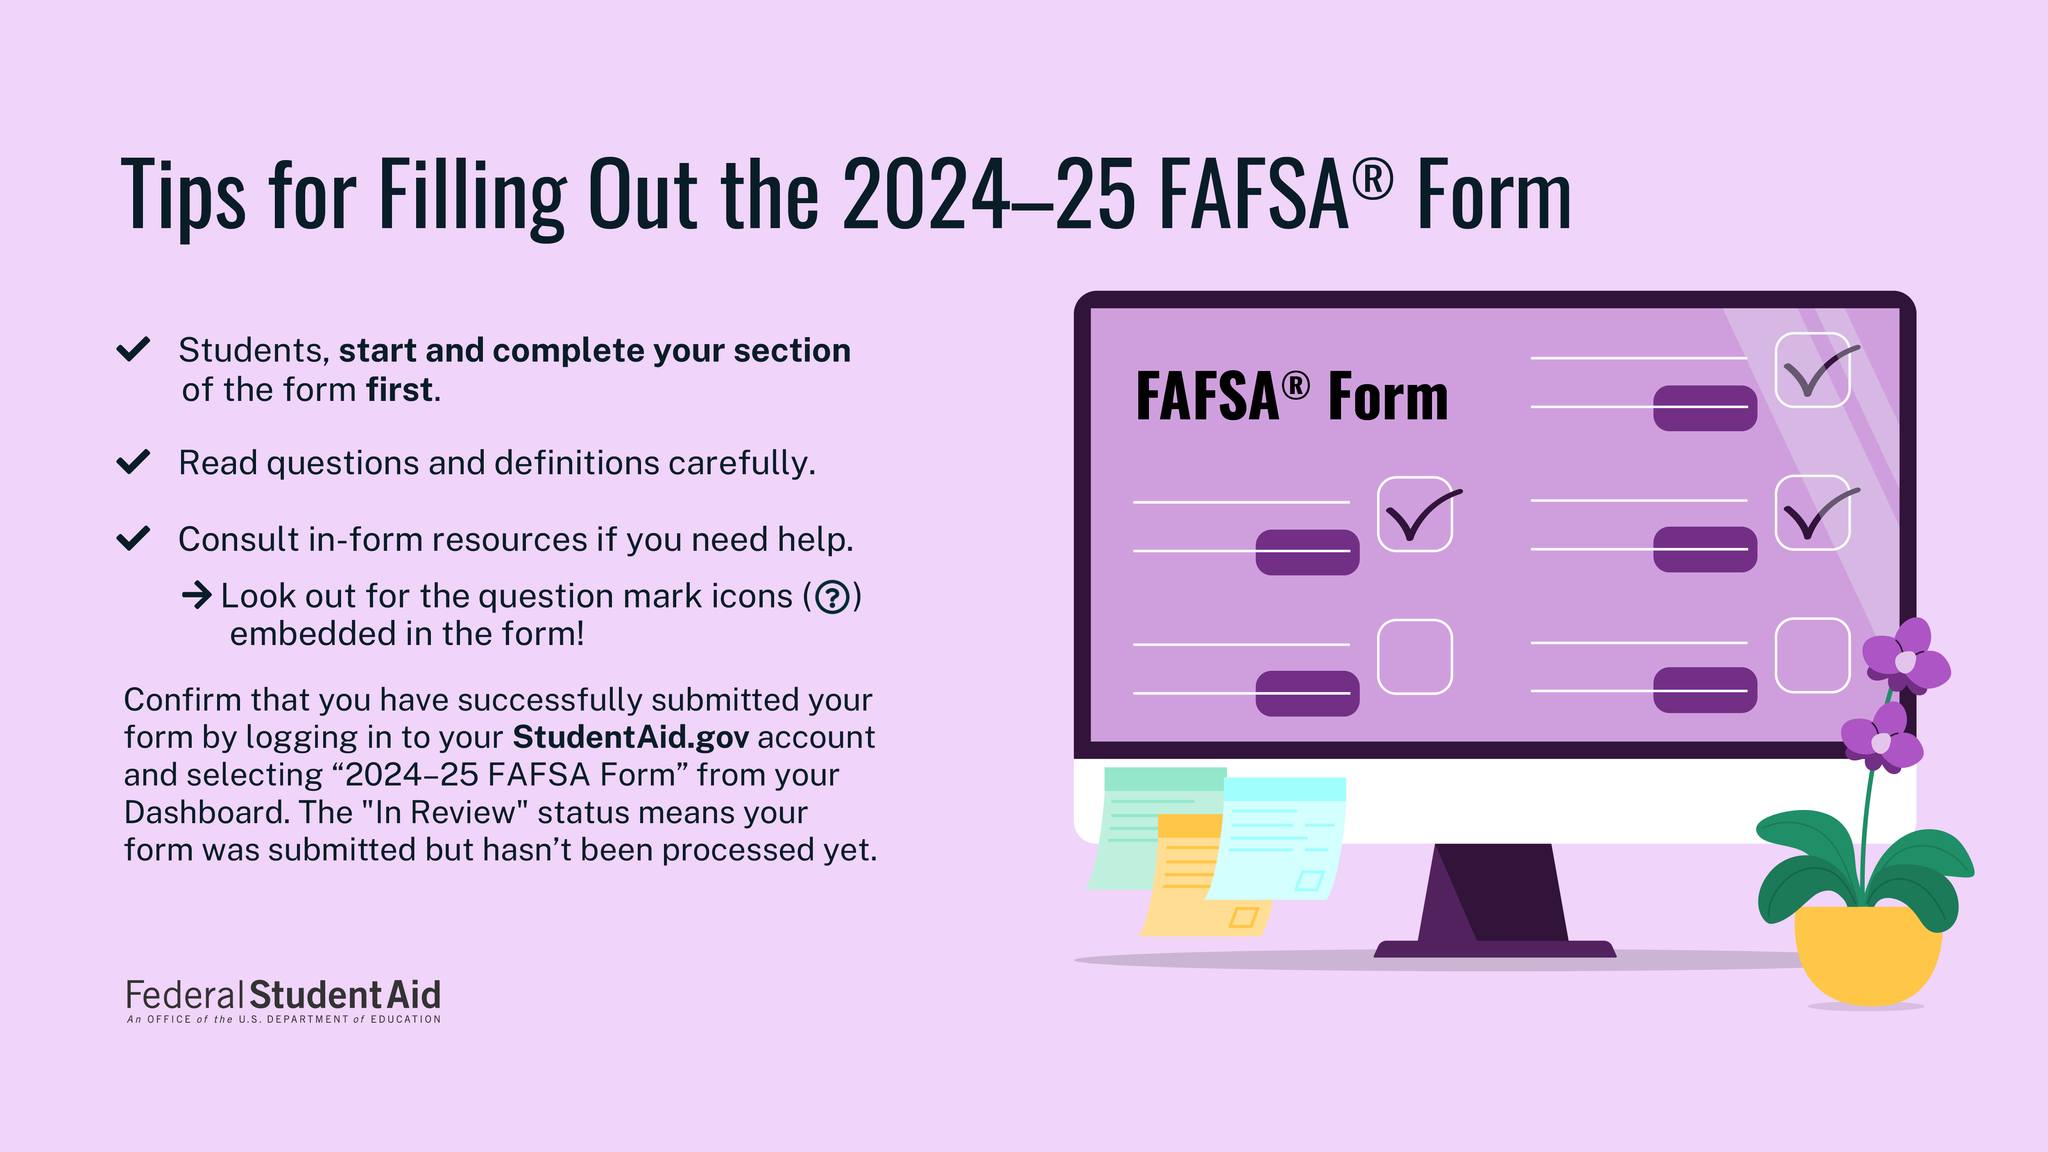 What to do after submitting FAFSA